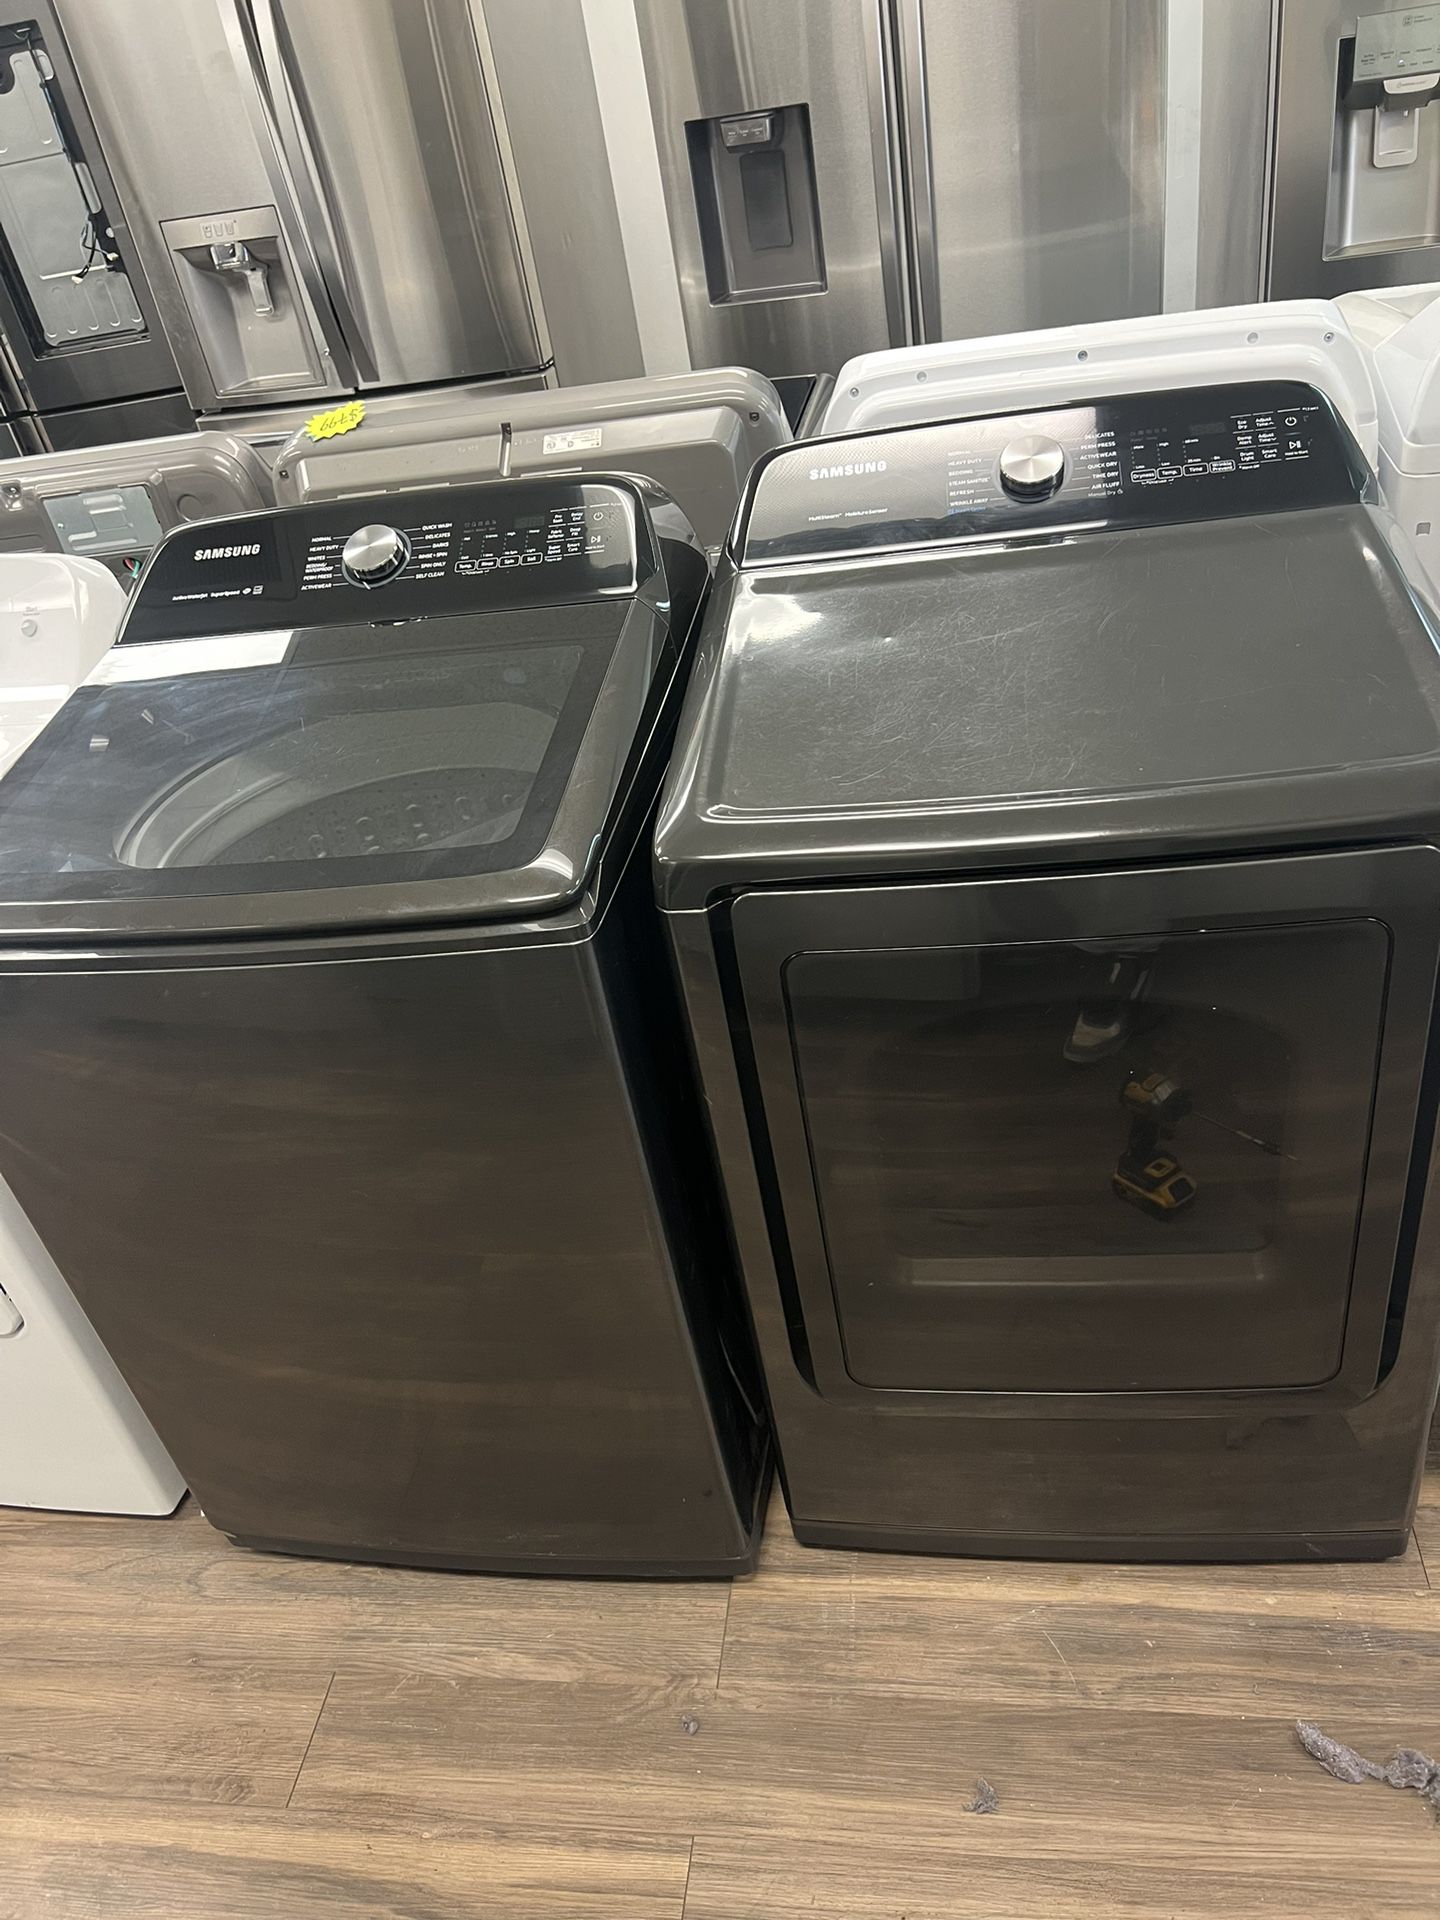 Washer And Dryer Samsung 